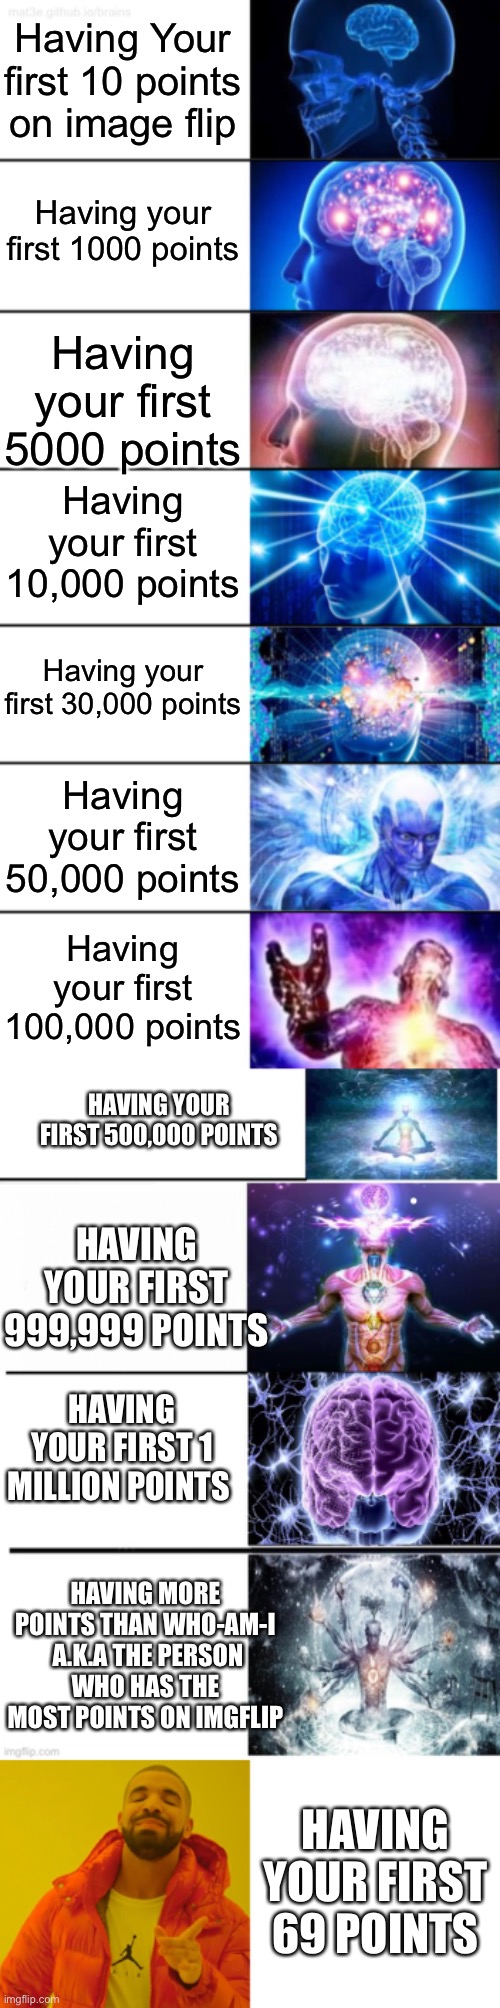 Everyone's first | Having Your first 10 points on image flip; Having your first 1000 points; Having your first 5000 points; Having your first 10,000 points; Having your first 30,000 points; Having your first 50,000 points; Having your first 100,000 points; HAVING YOUR FIRST 500,000 POINTS; HAVING YOUR FIRST 999,999 POINTS; HAVING YOUR FIRST 1 MILLION POINTS; HAVING MORE POINTS THAN WHO-AM-I  A.K.A THE PERSON WHO HAS THE MOST POINTS ON IMGFLIP; HAVING YOUR FIRST 69 POINTS | image tagged in 7-tier expanding brain,expanding brain 5 panel,expanding brain meme,expanding brain w/ 7 panels,memes,drake hotline bling | made w/ Imgflip meme maker